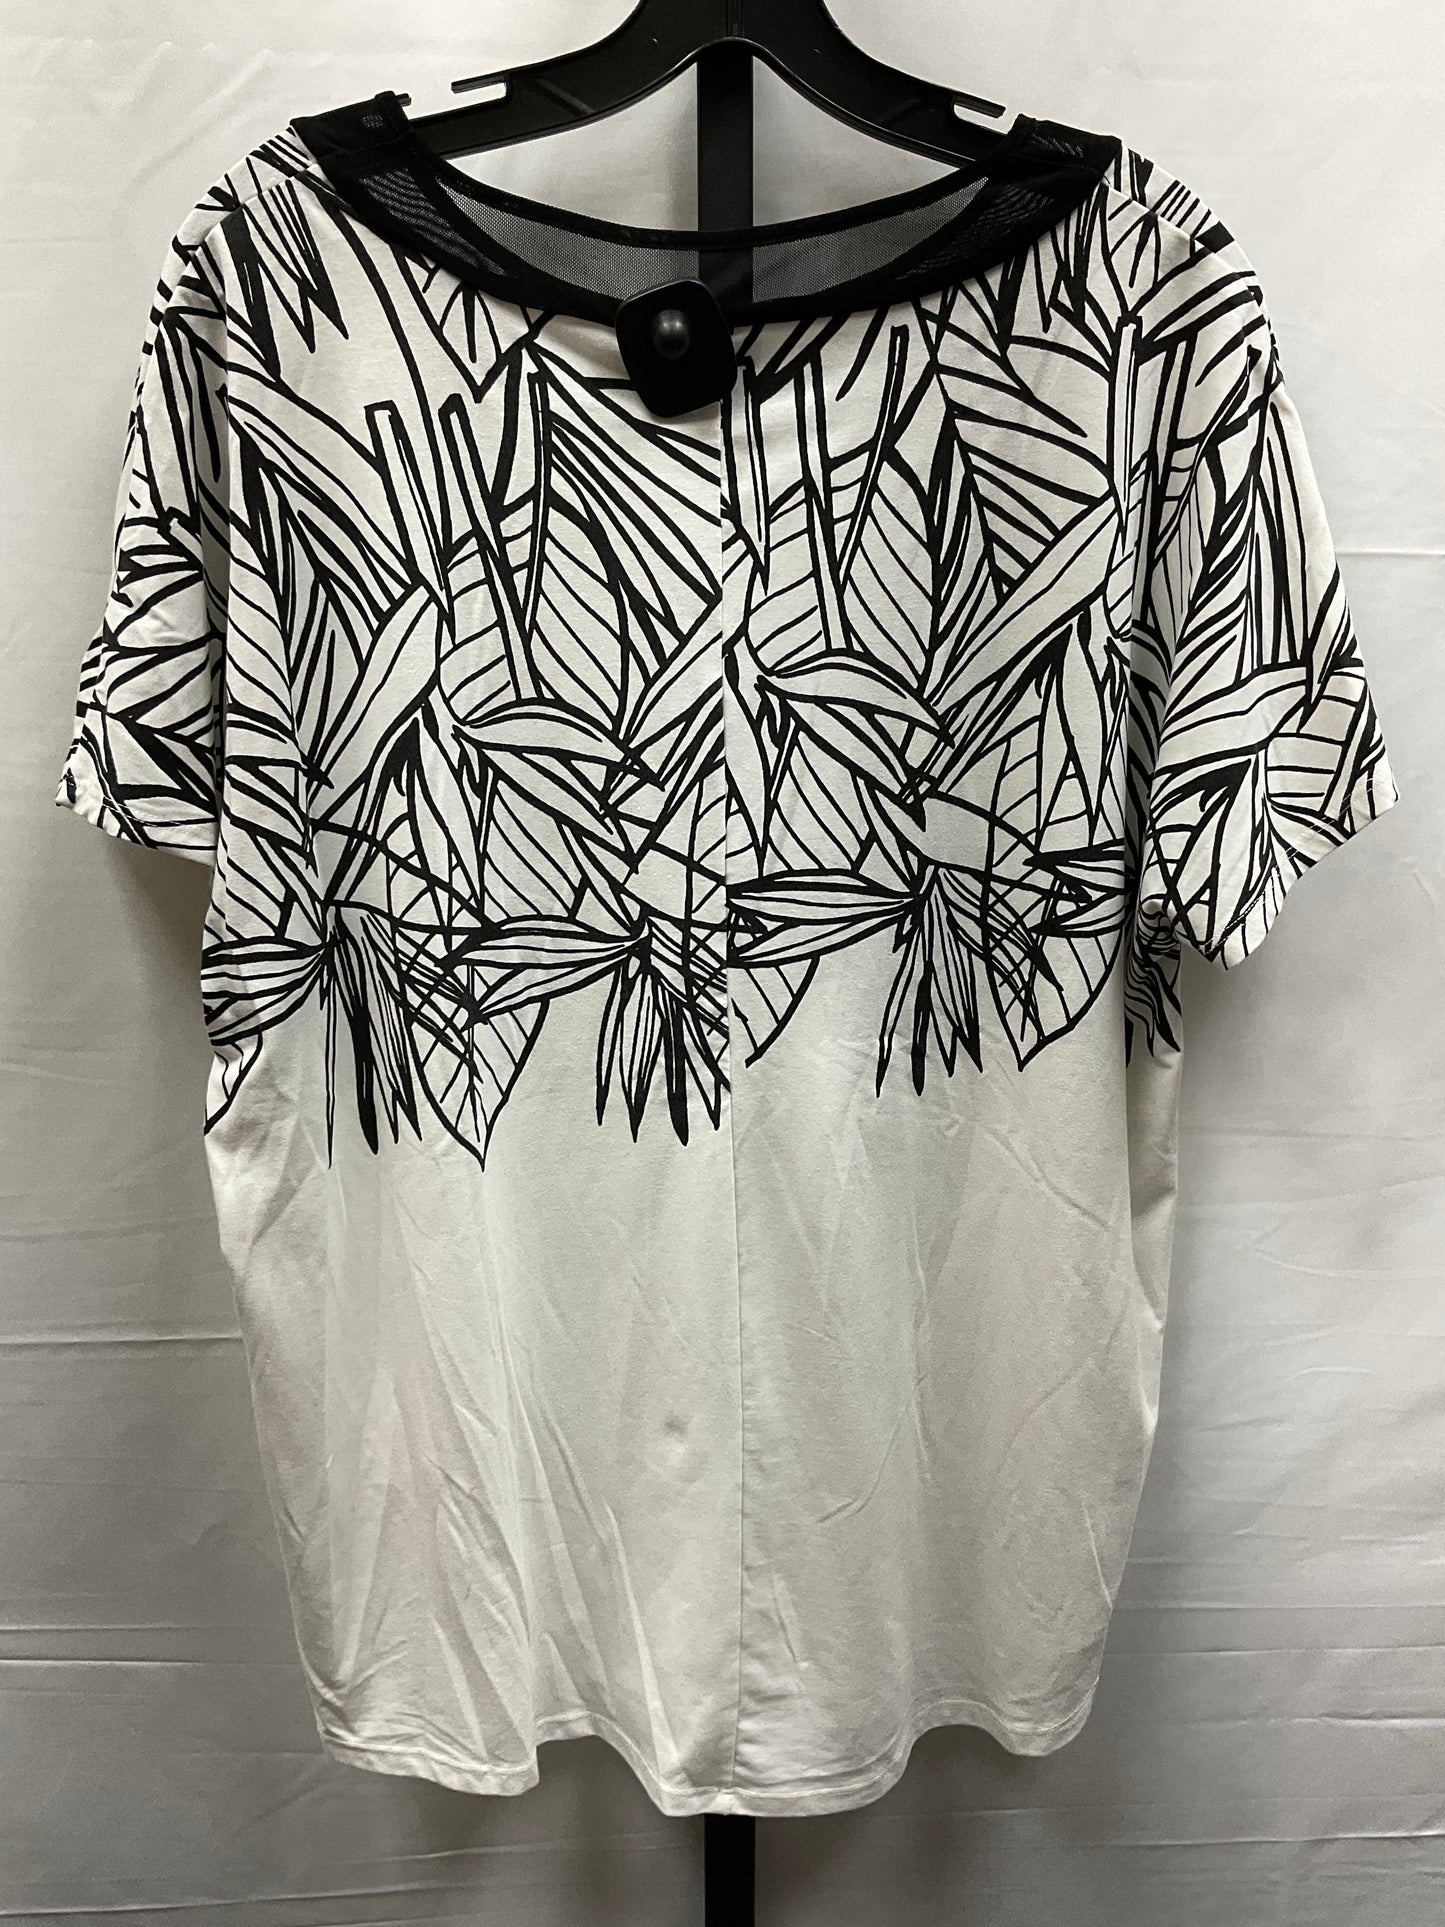 Black & White Top Short Sleeve Chicos, Size L